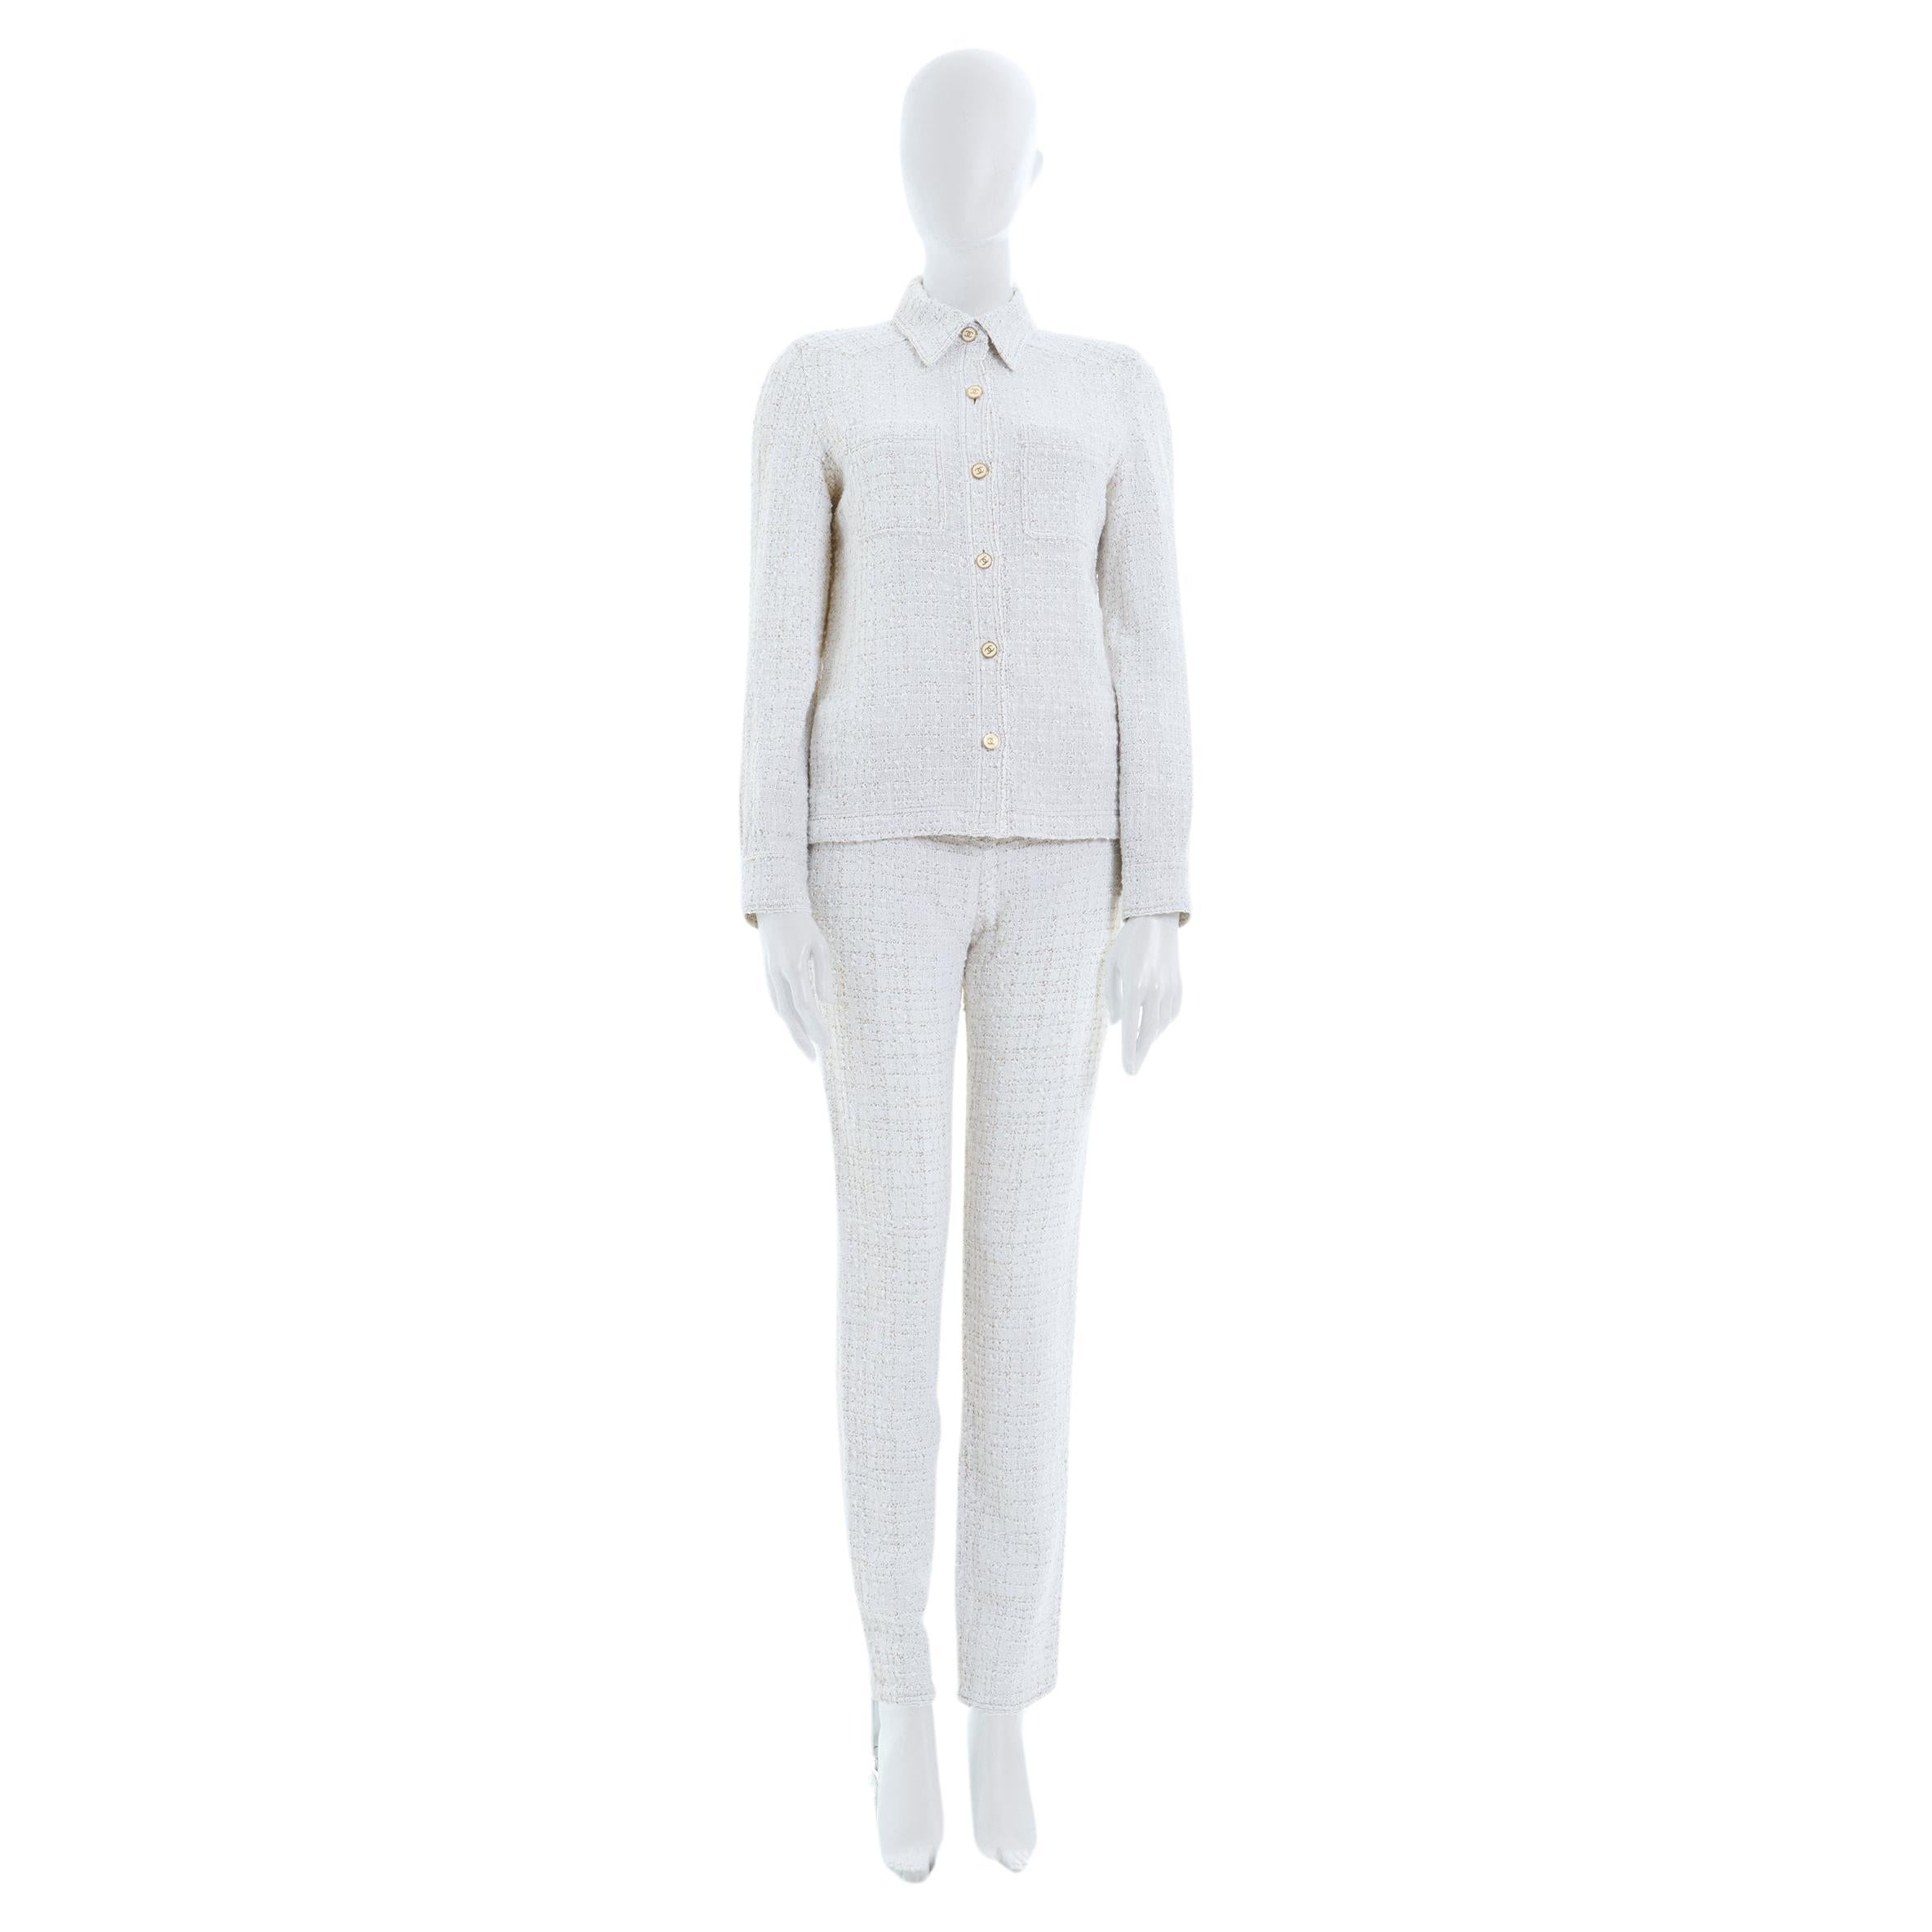 Chanel by Karl Lagerfeld S/S 2001 Off-White bouclé shirt jacket and pants set  For Sale